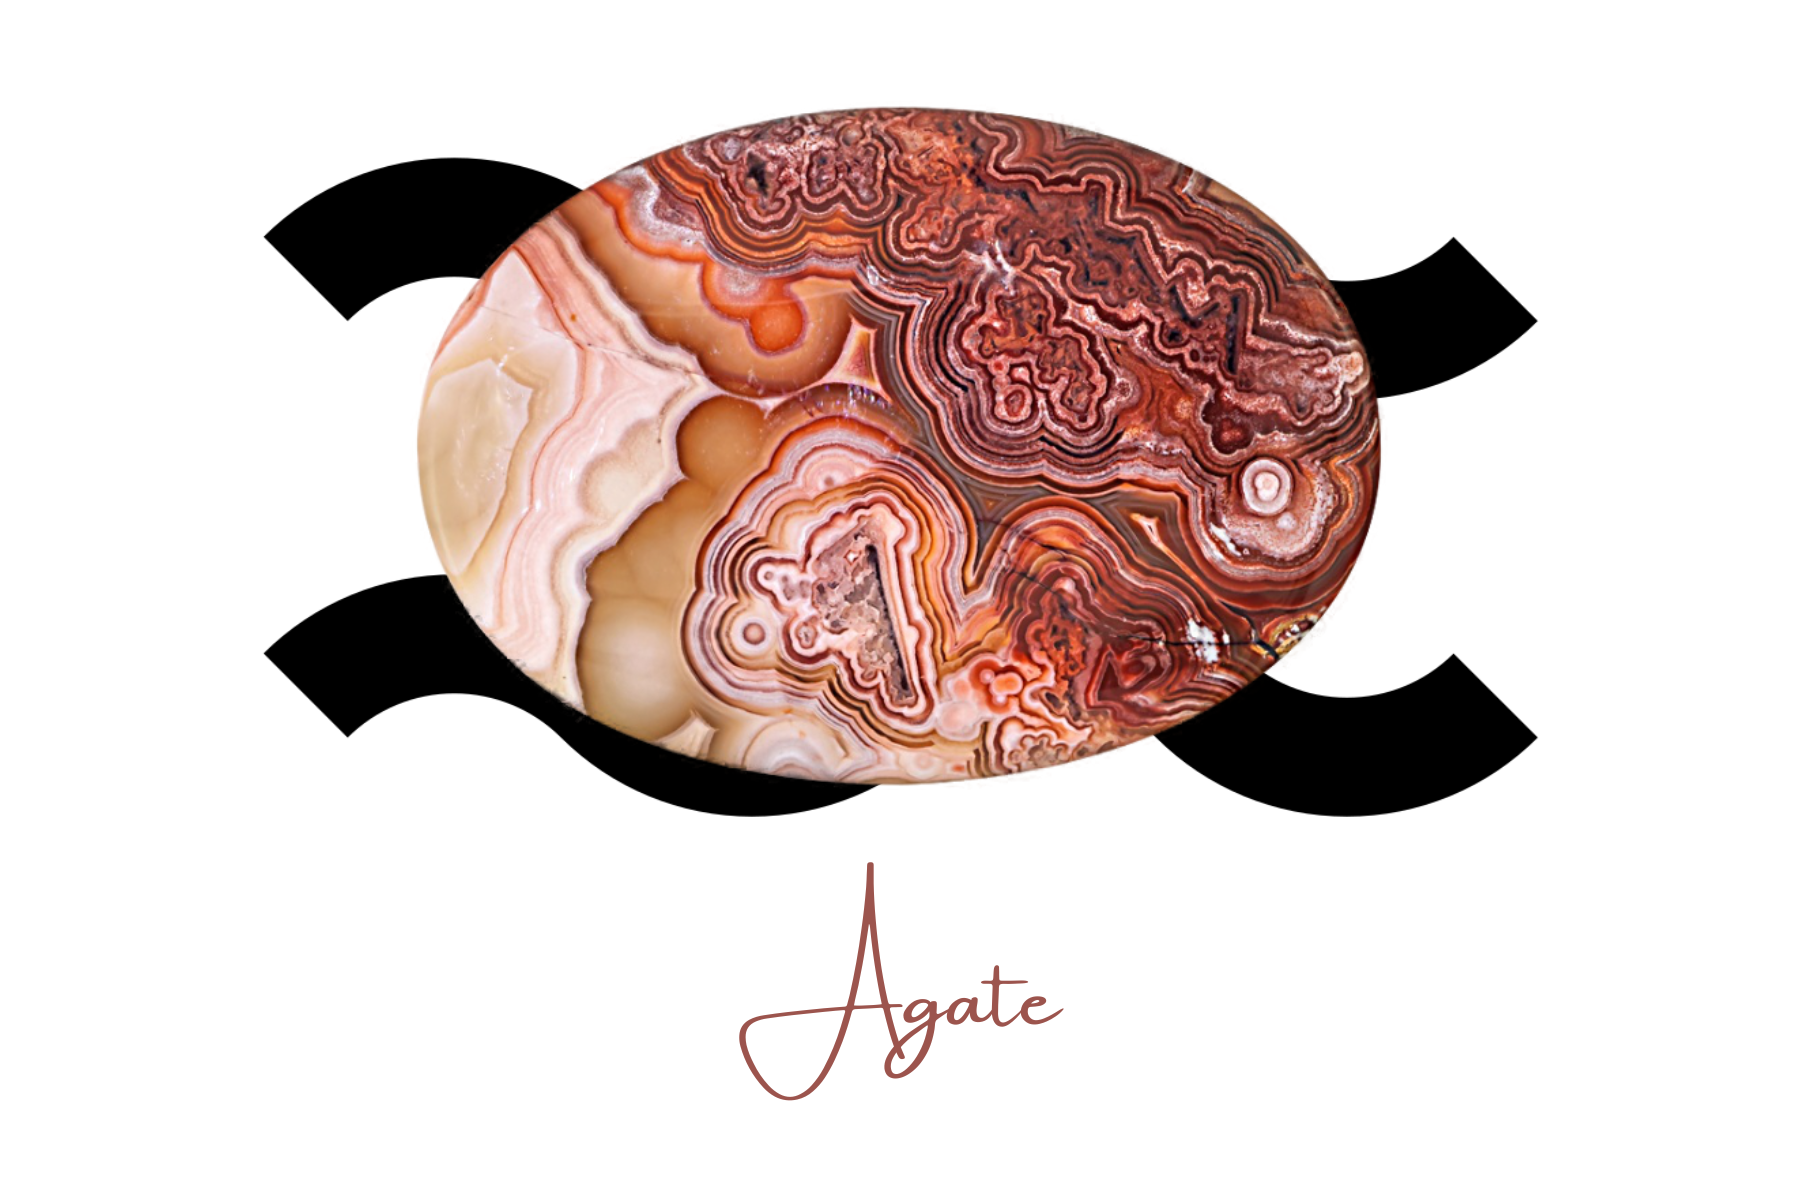 Oblong striped brown-white Agate over the Aquarius sign